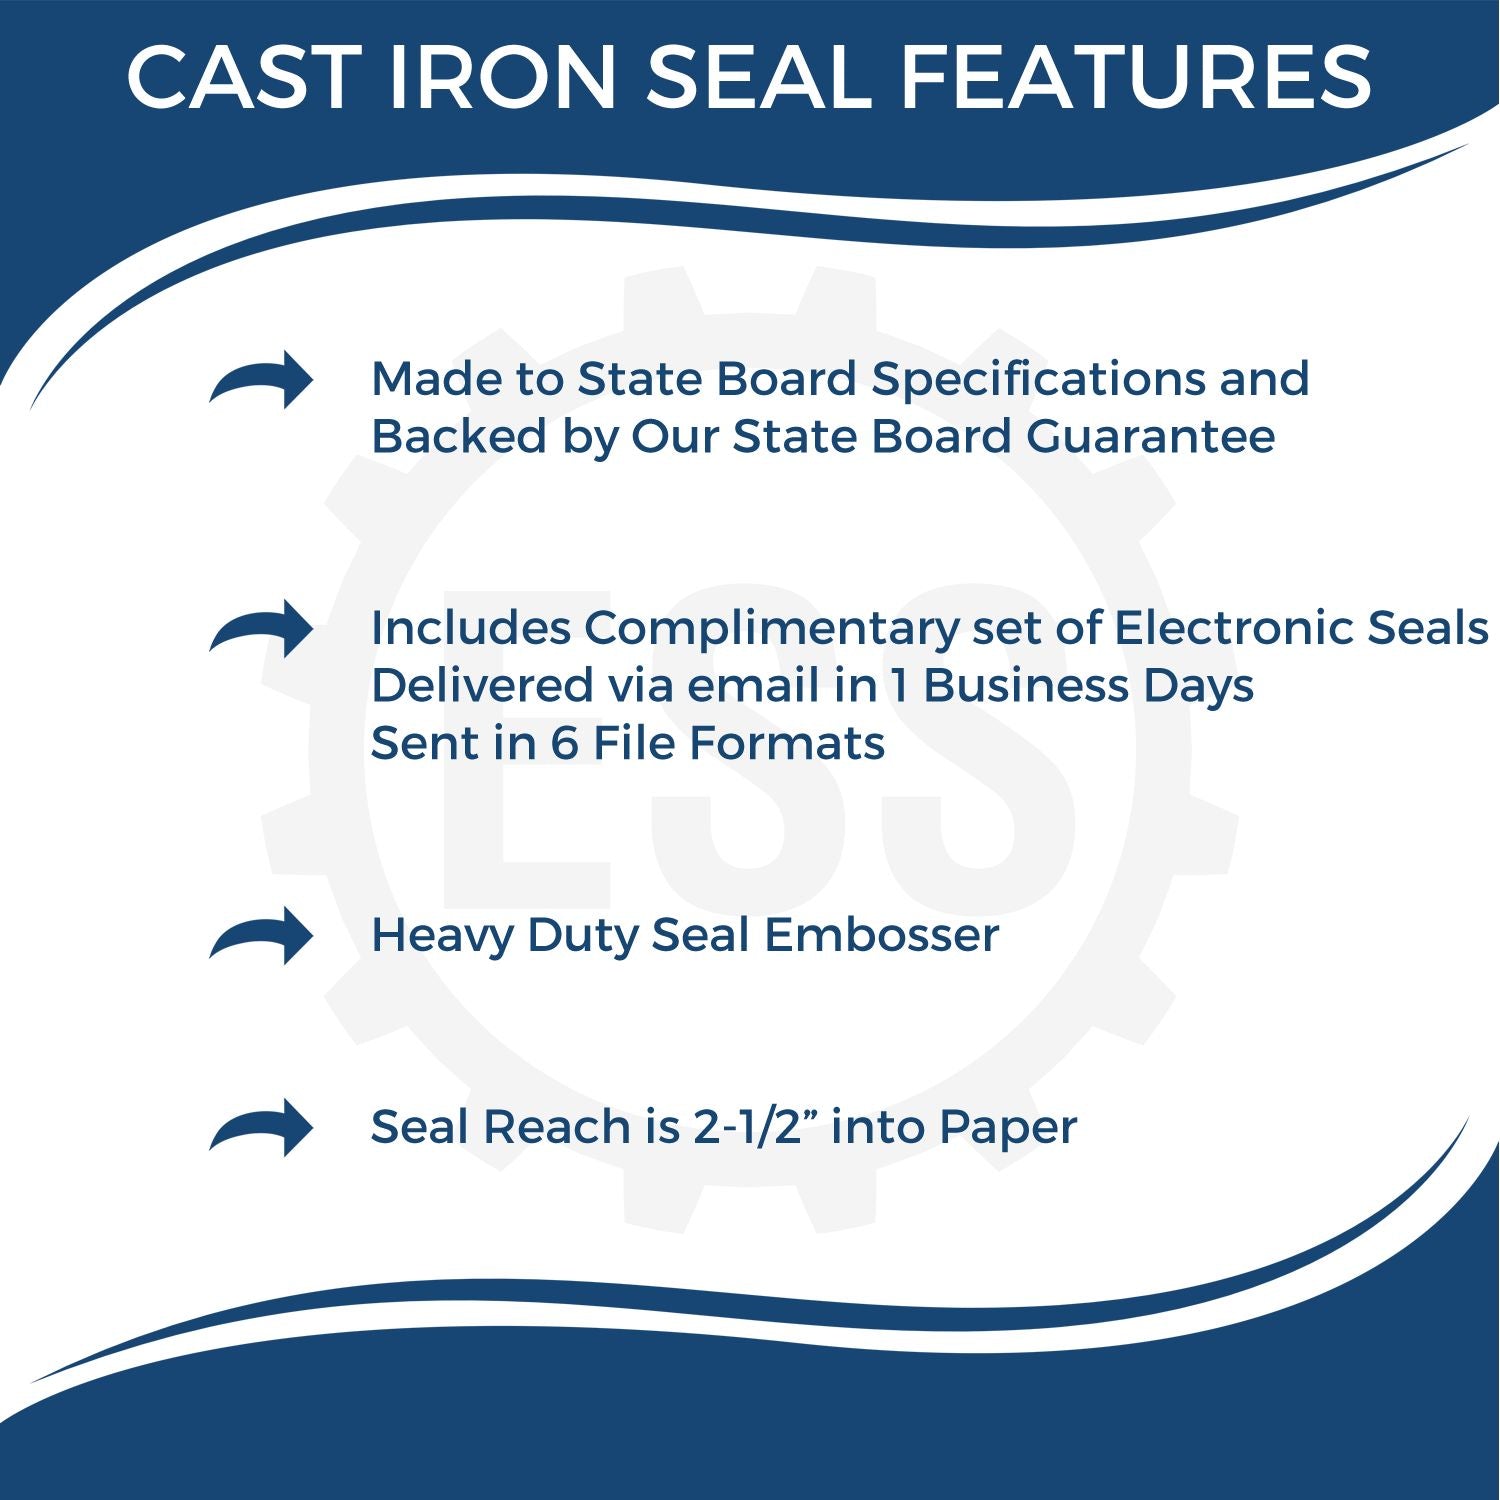 The main image for the Heavy Duty Cast Iron Florida Engineer Seal Embosser depicting a sample of the imprint and electronic files